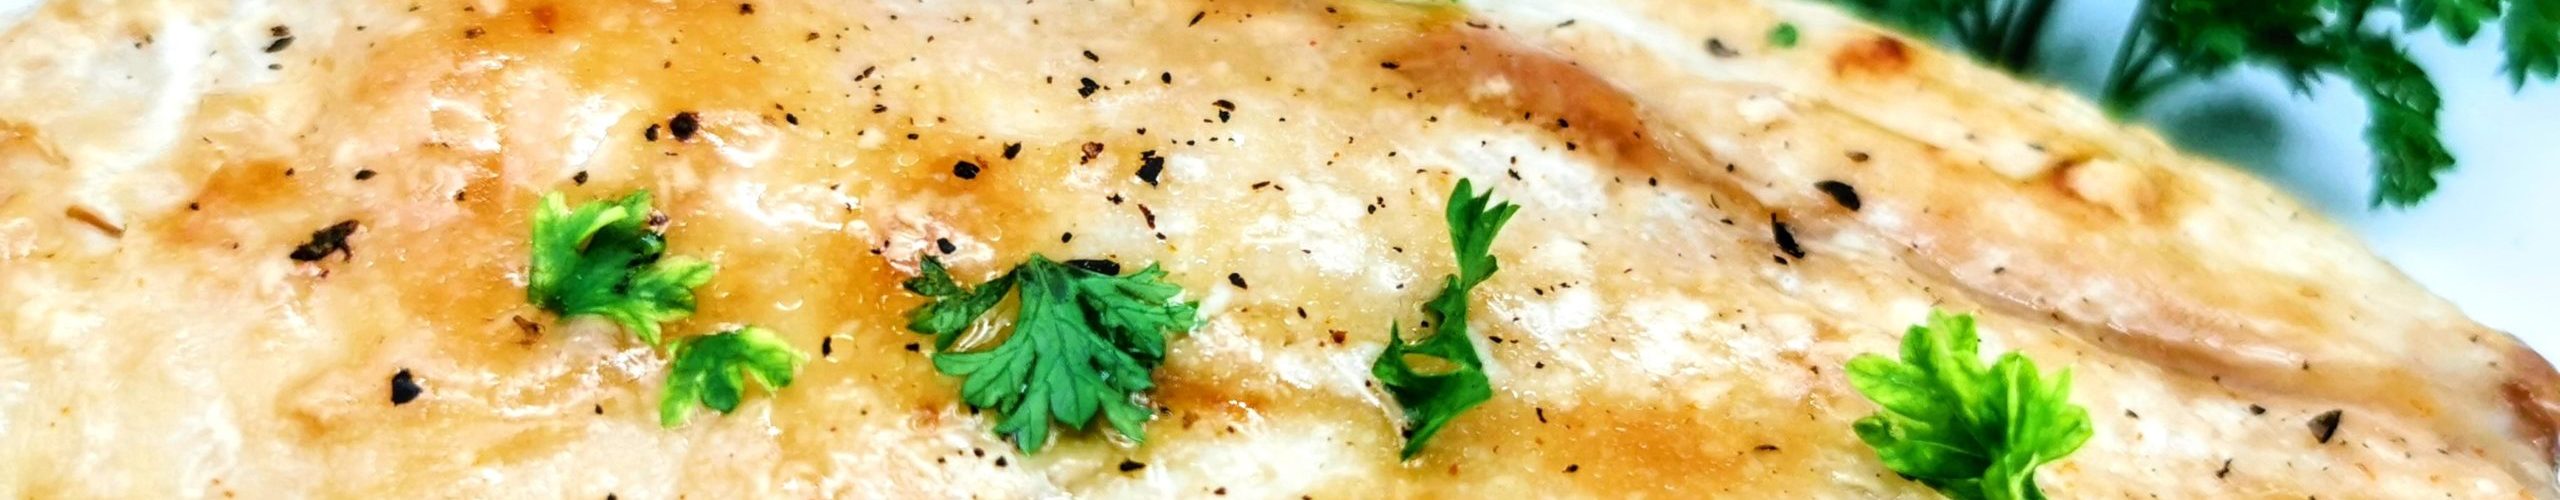 Baked Fish in Foil Recipe